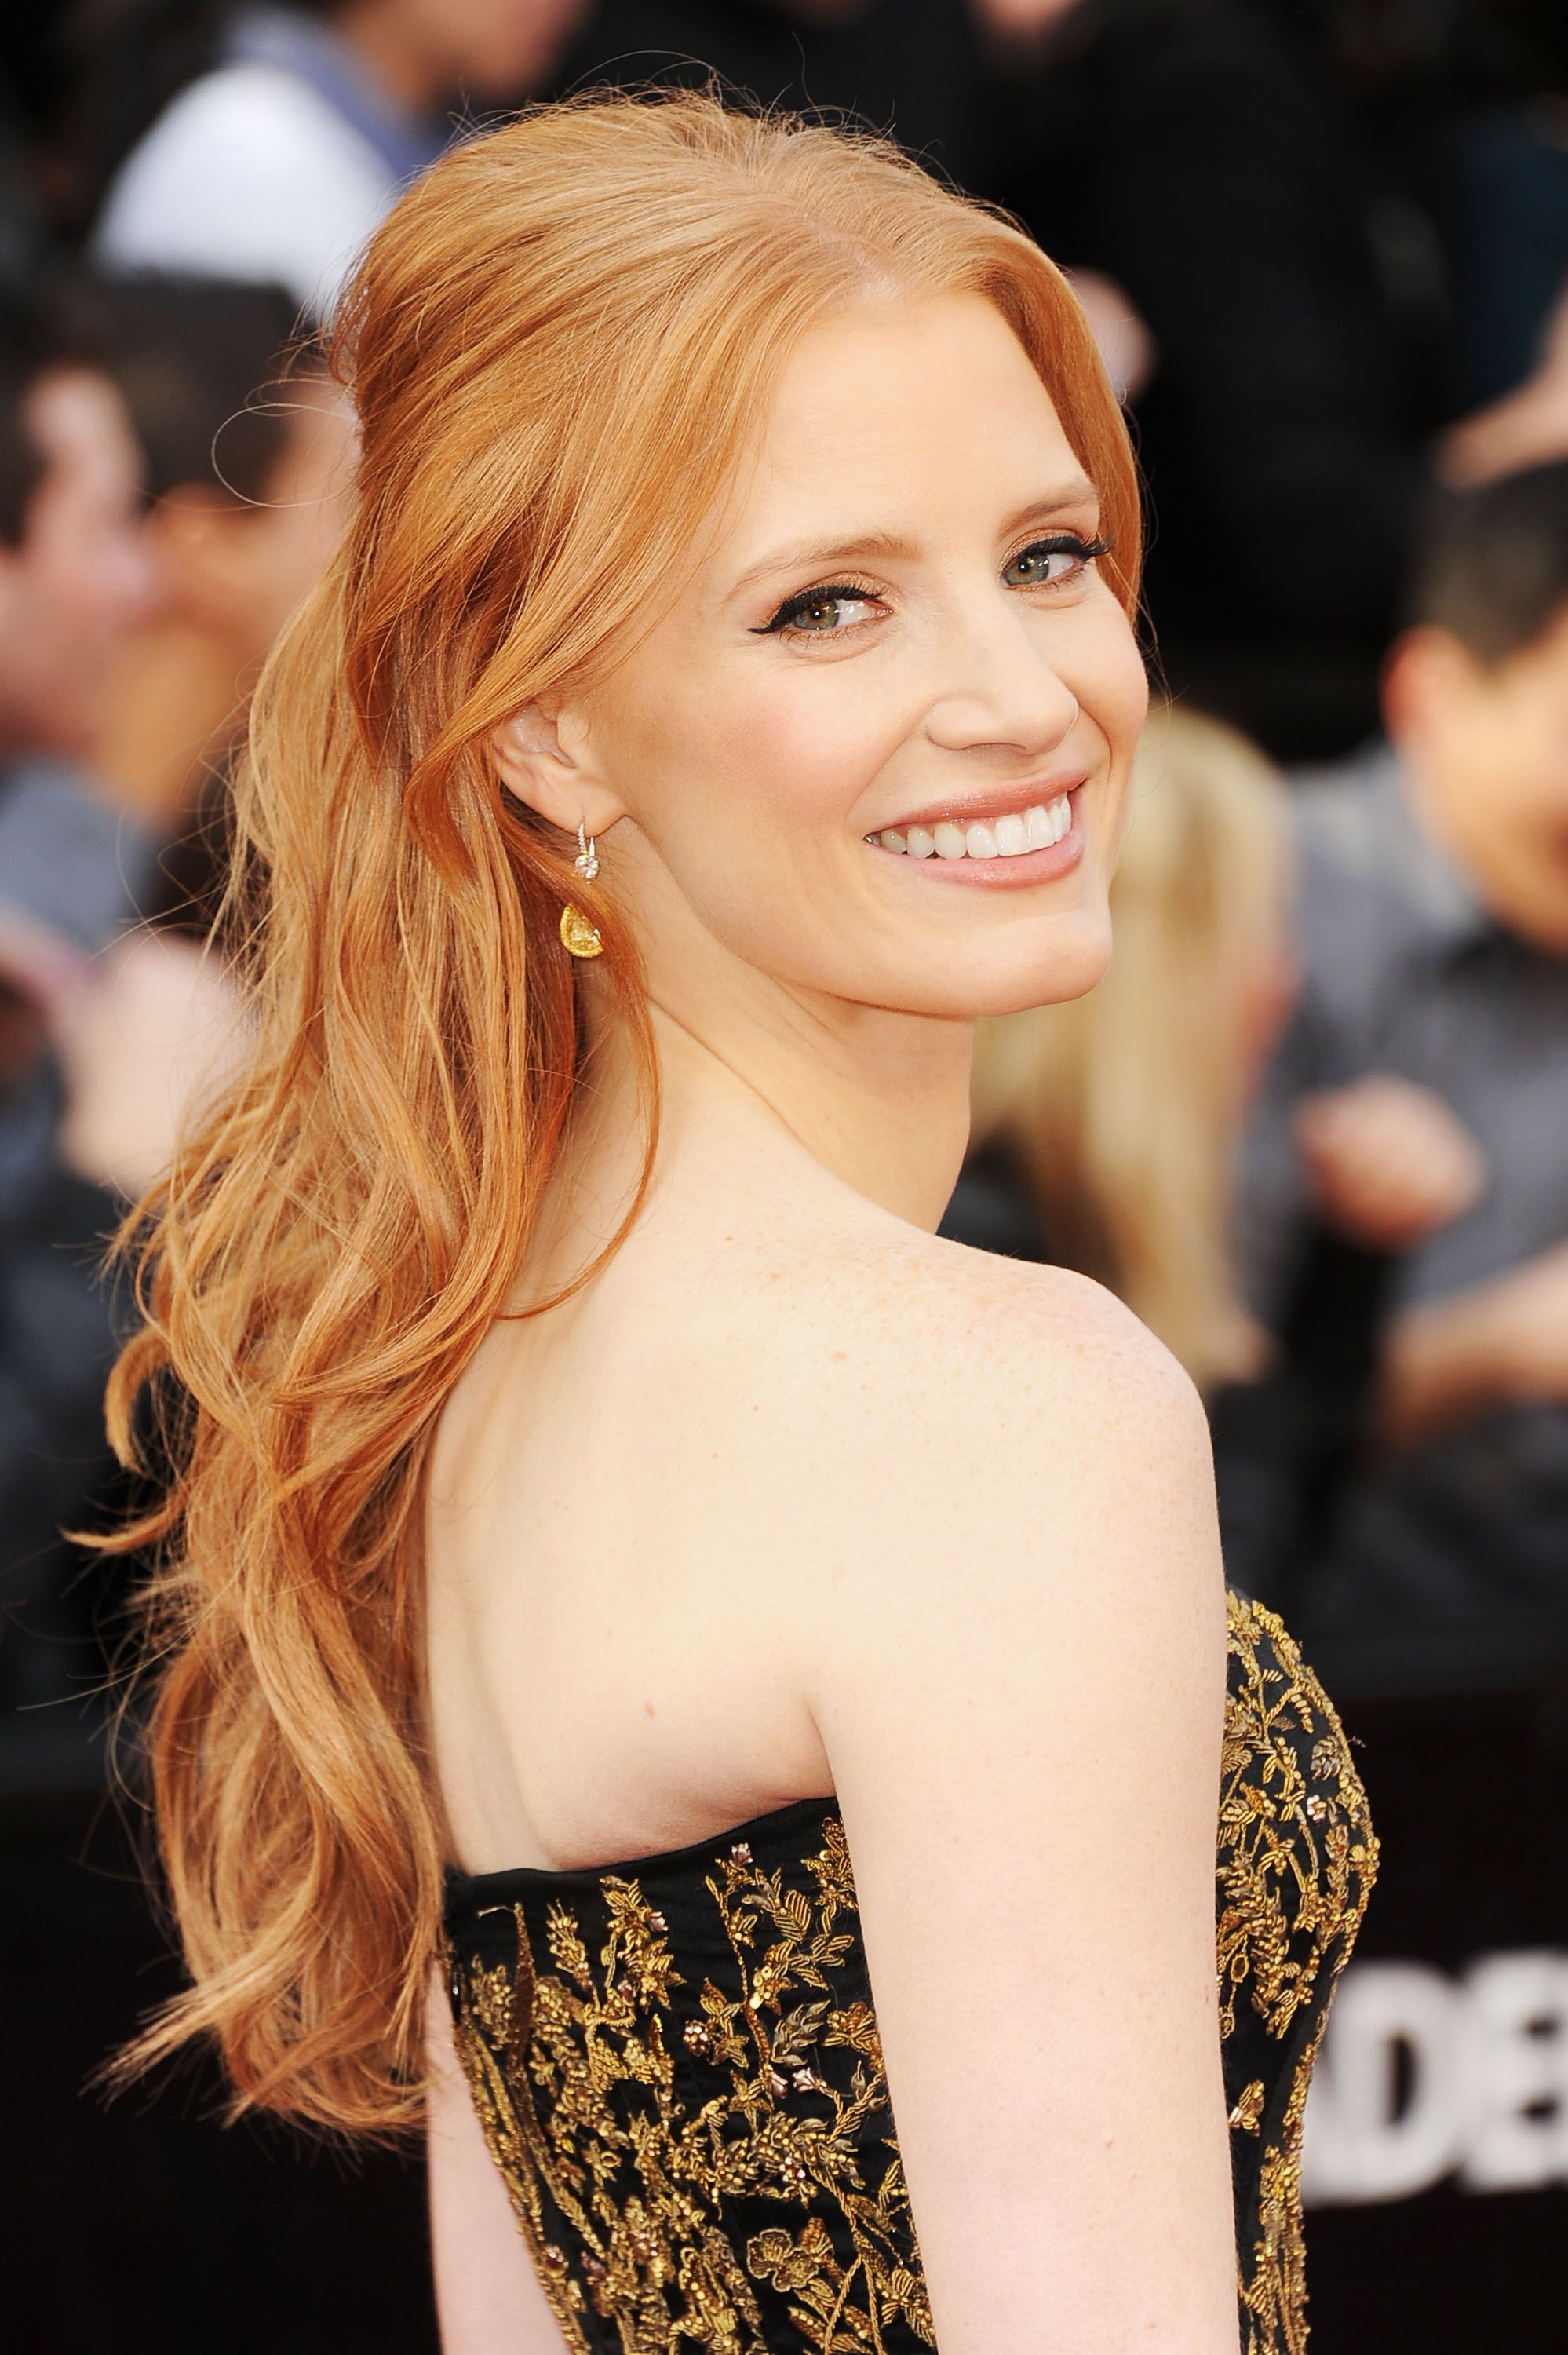 Red hair inspiration: celebrity styles